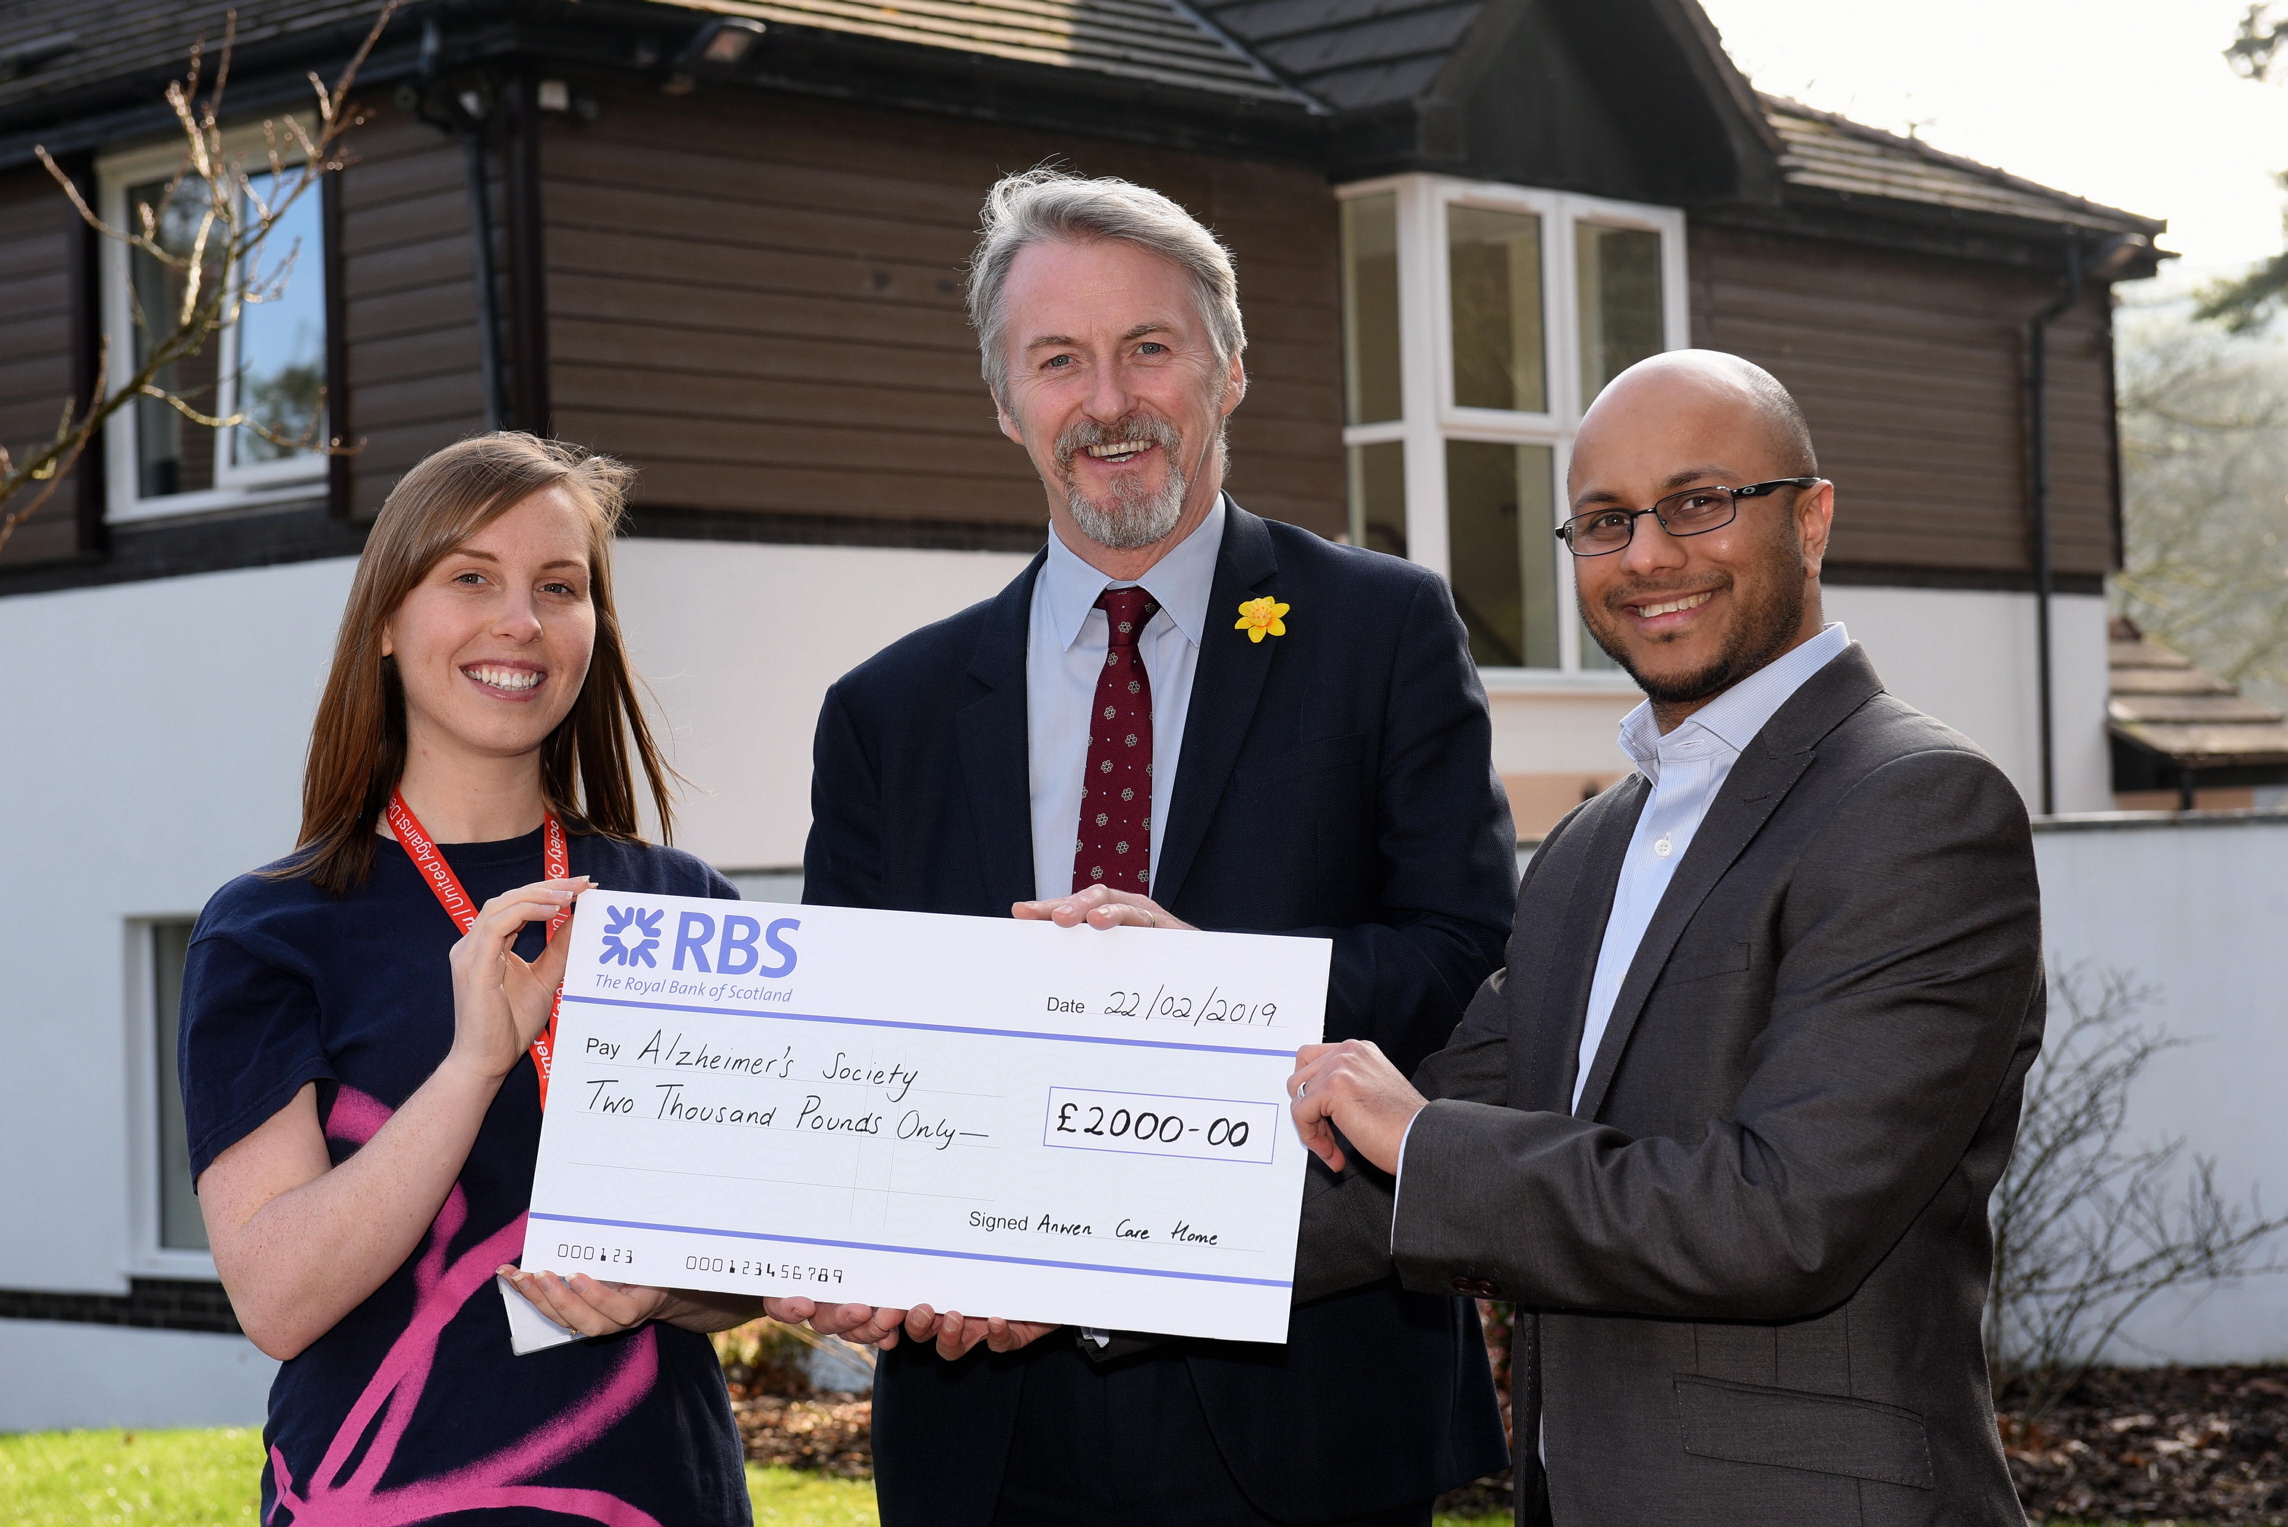 Dementia centre celebrates national award success with charity donation